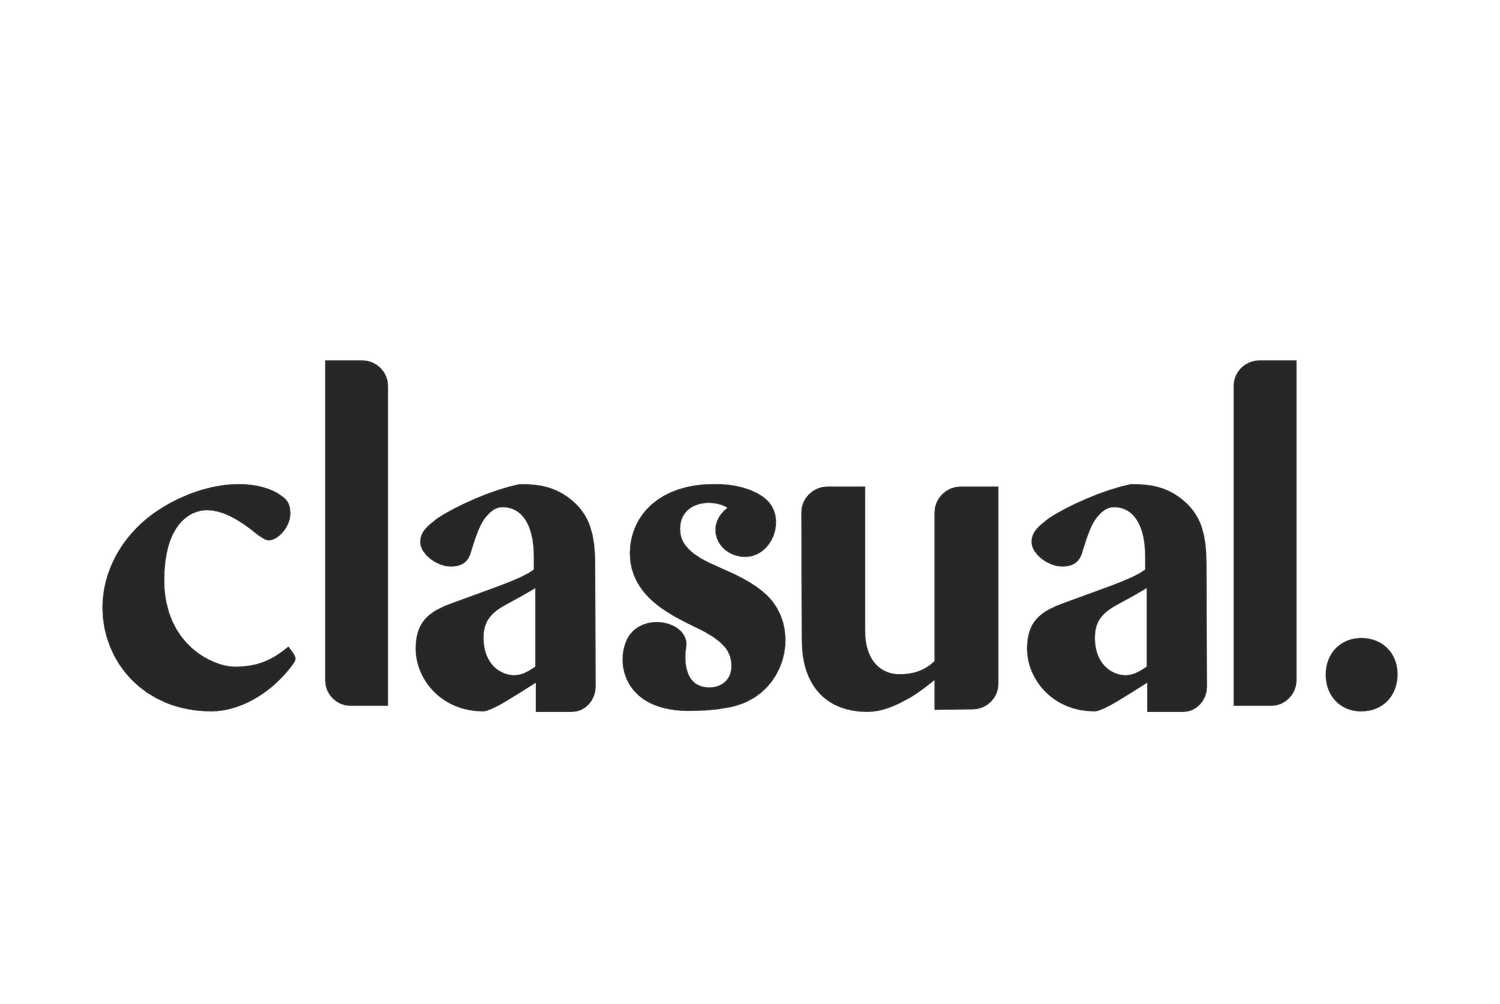 Clasual